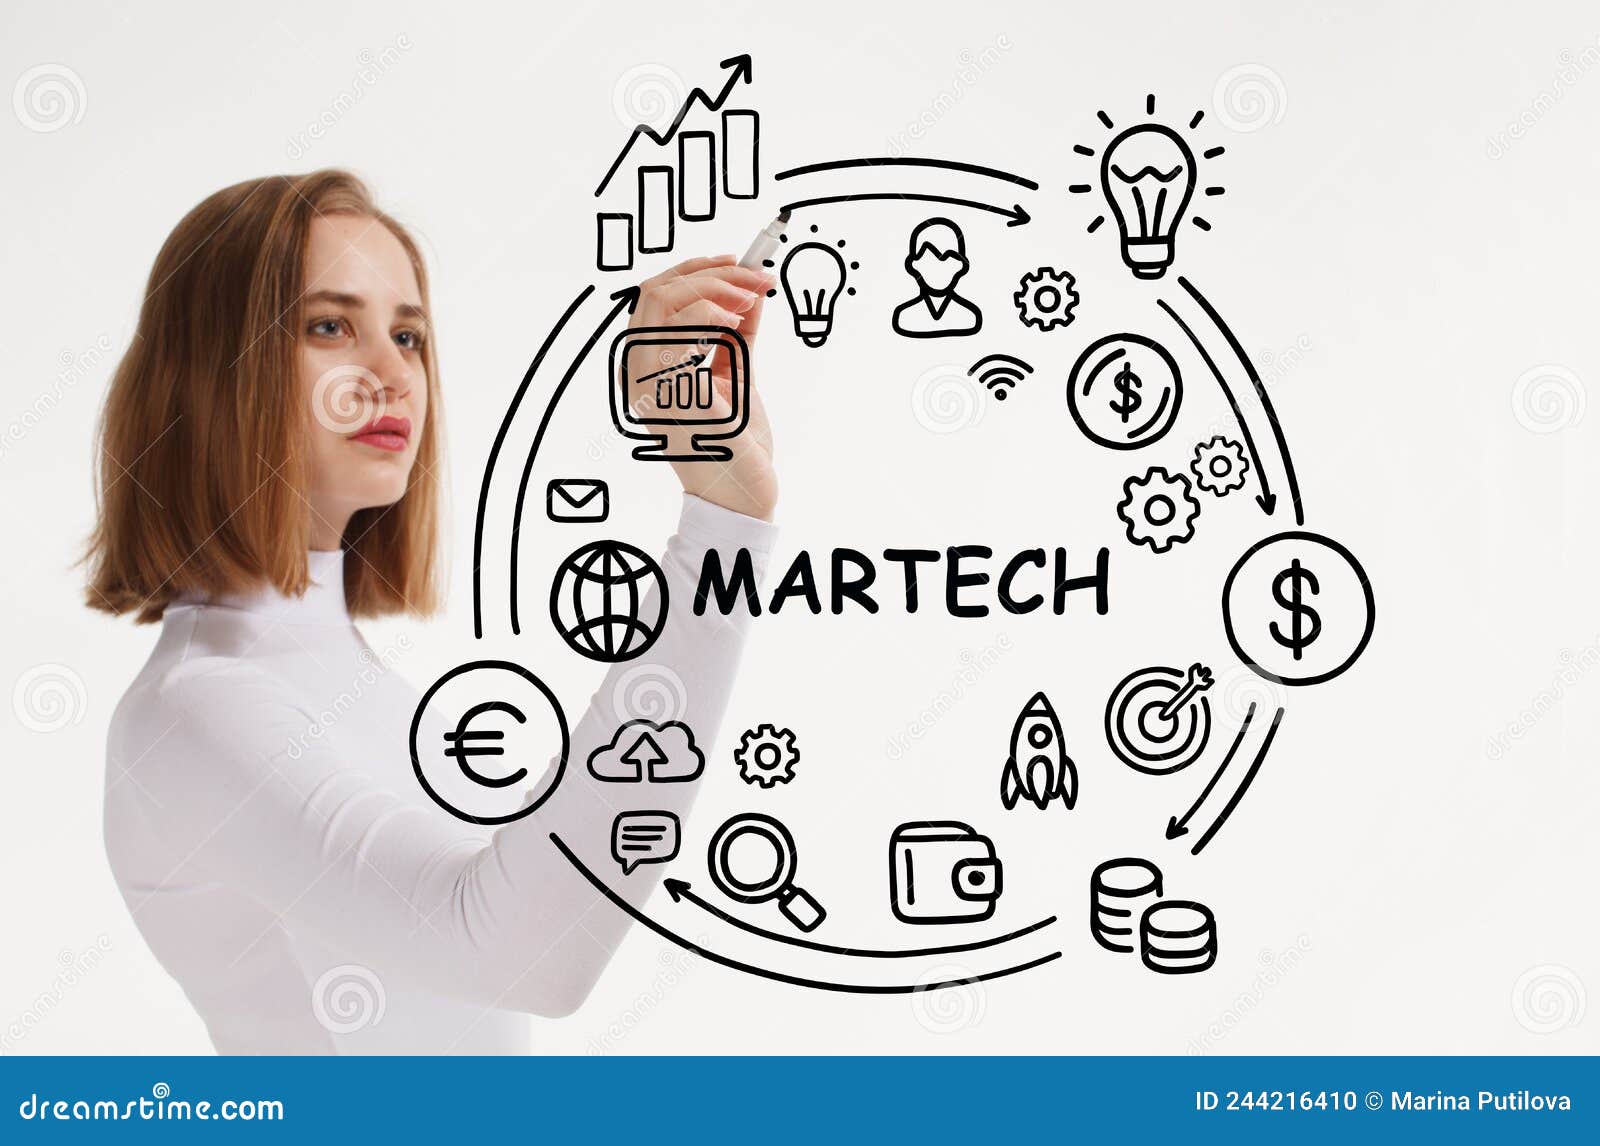 martech marketing technology concept on virtual screen interface. business, technology, internet and network concept